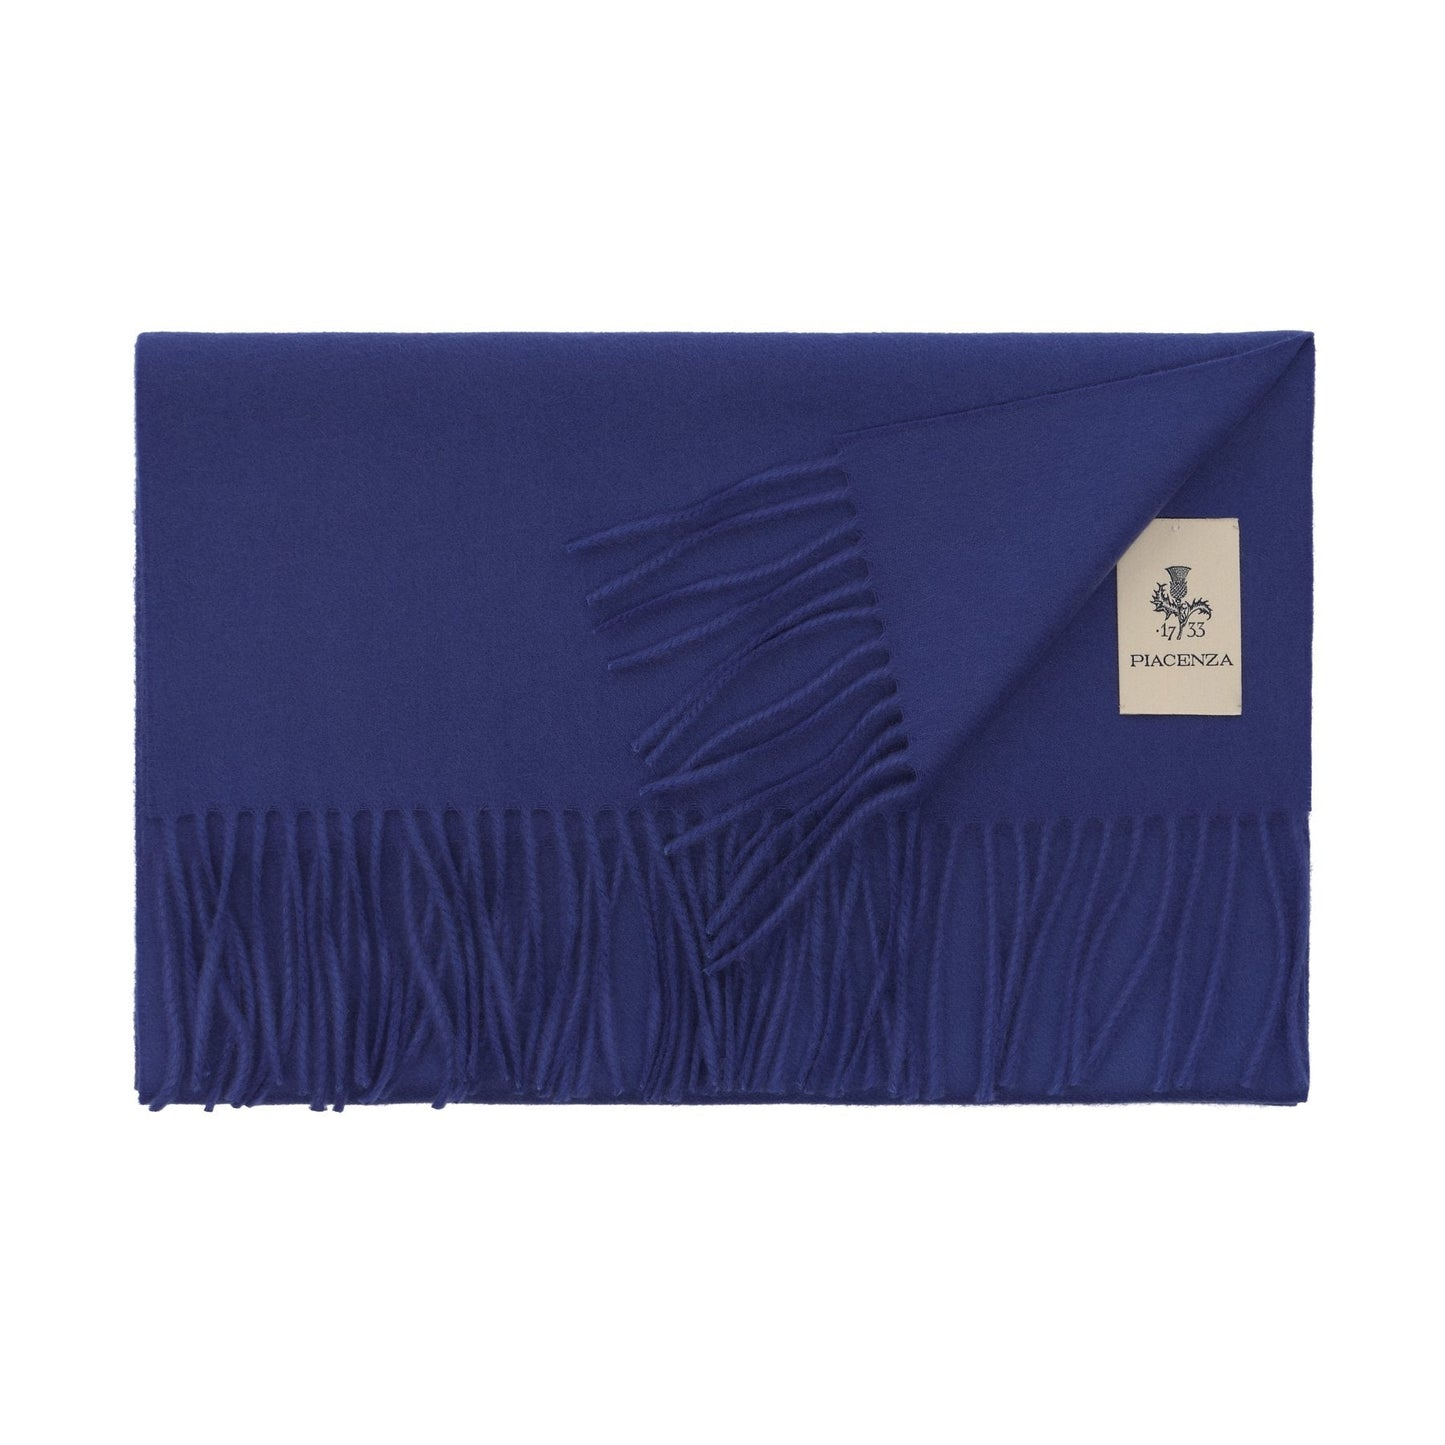 Piacenza Cashmere Fringed Cashmere Scarf in Royal Blue - SARTALE